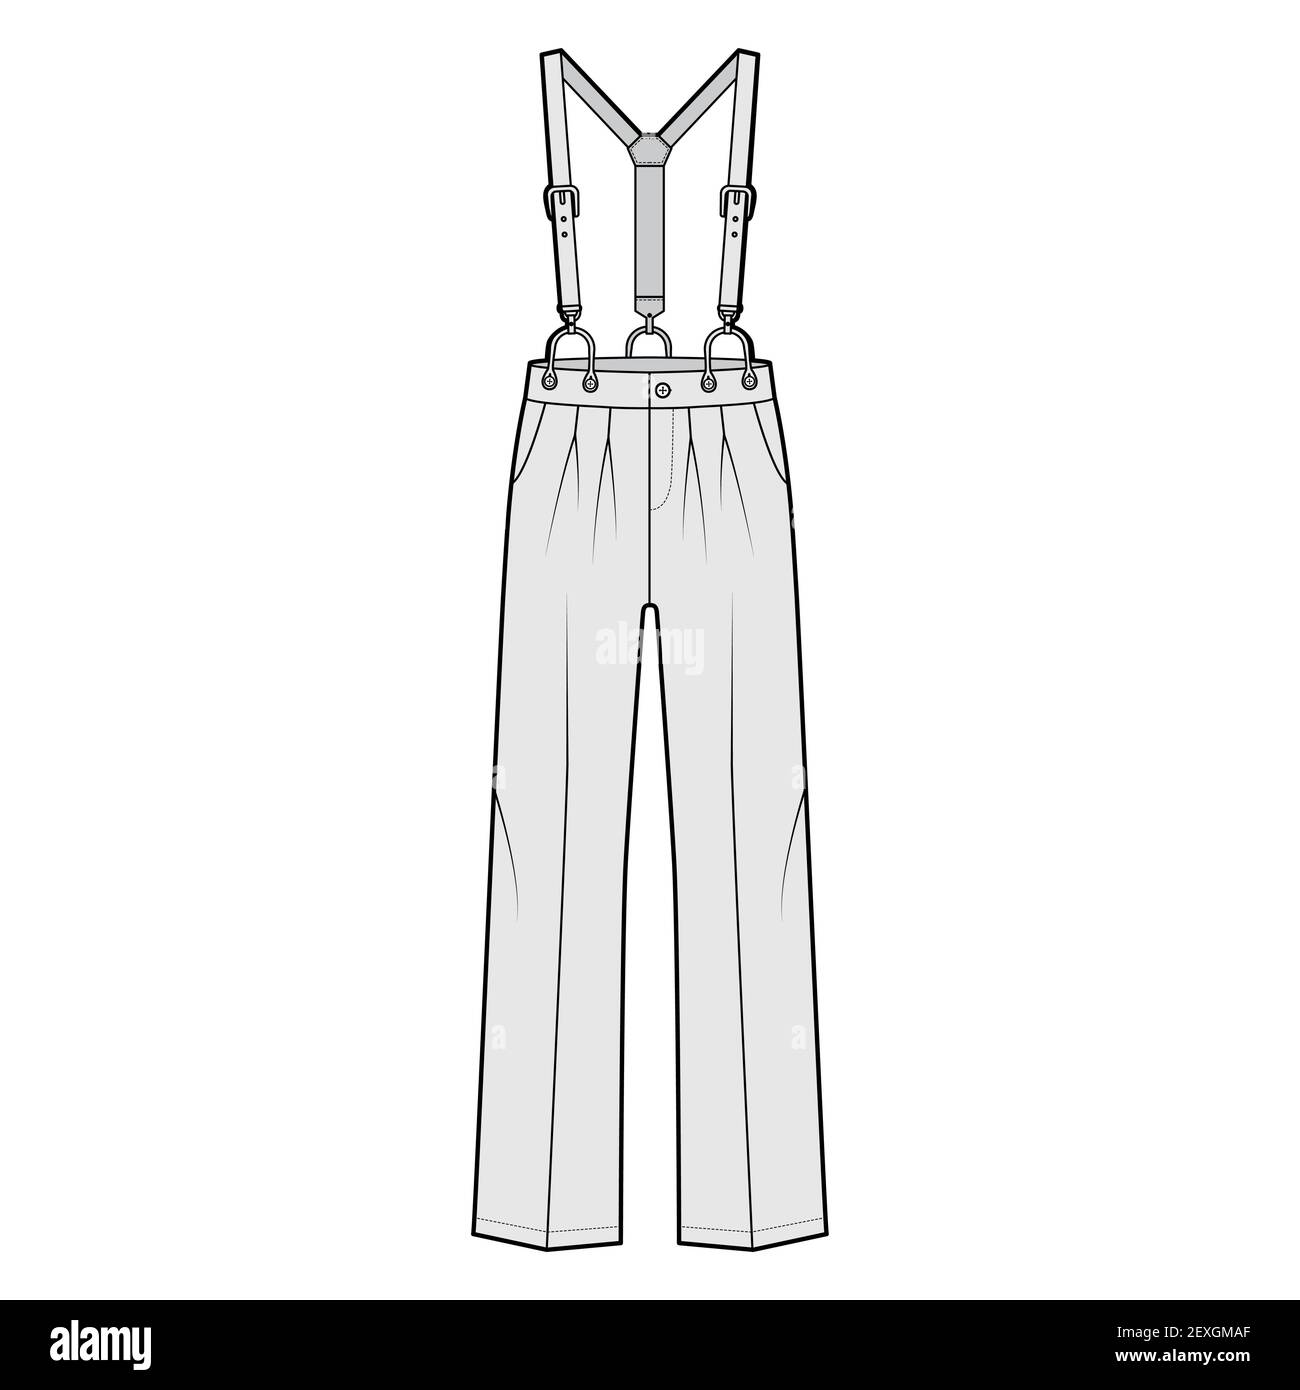 Suspender Pants Dungarees technical fashion illustration with full length, low waist, rise, pockets. Flat apparel garment bottom front, grey color style. Women, men unisex CAD mockup Stock Vector